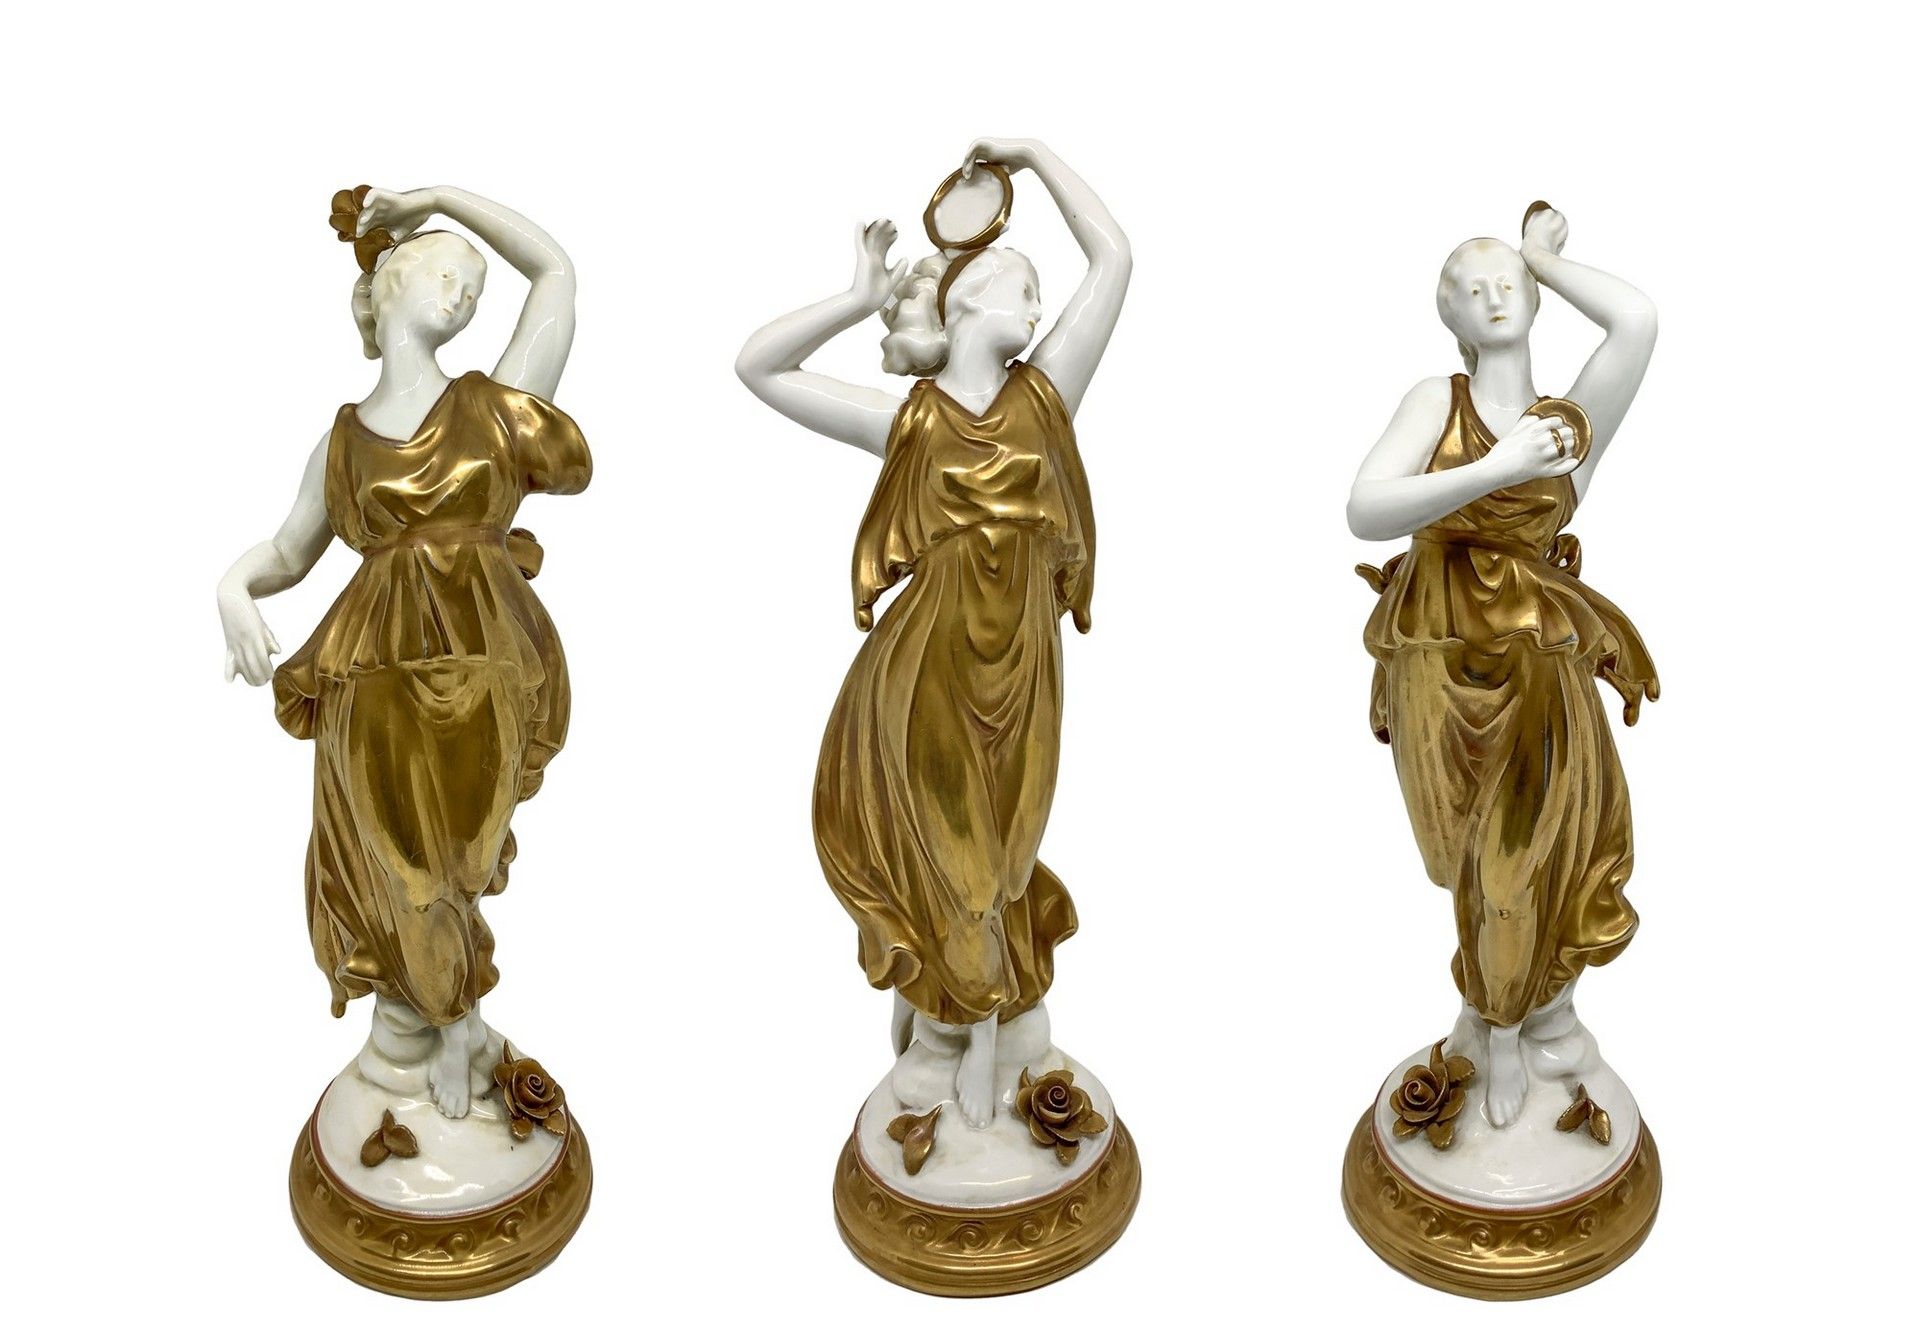 CAPODIMONTE N.3 Figurines in white and gilded porcelain depicting dancing women &hellip;